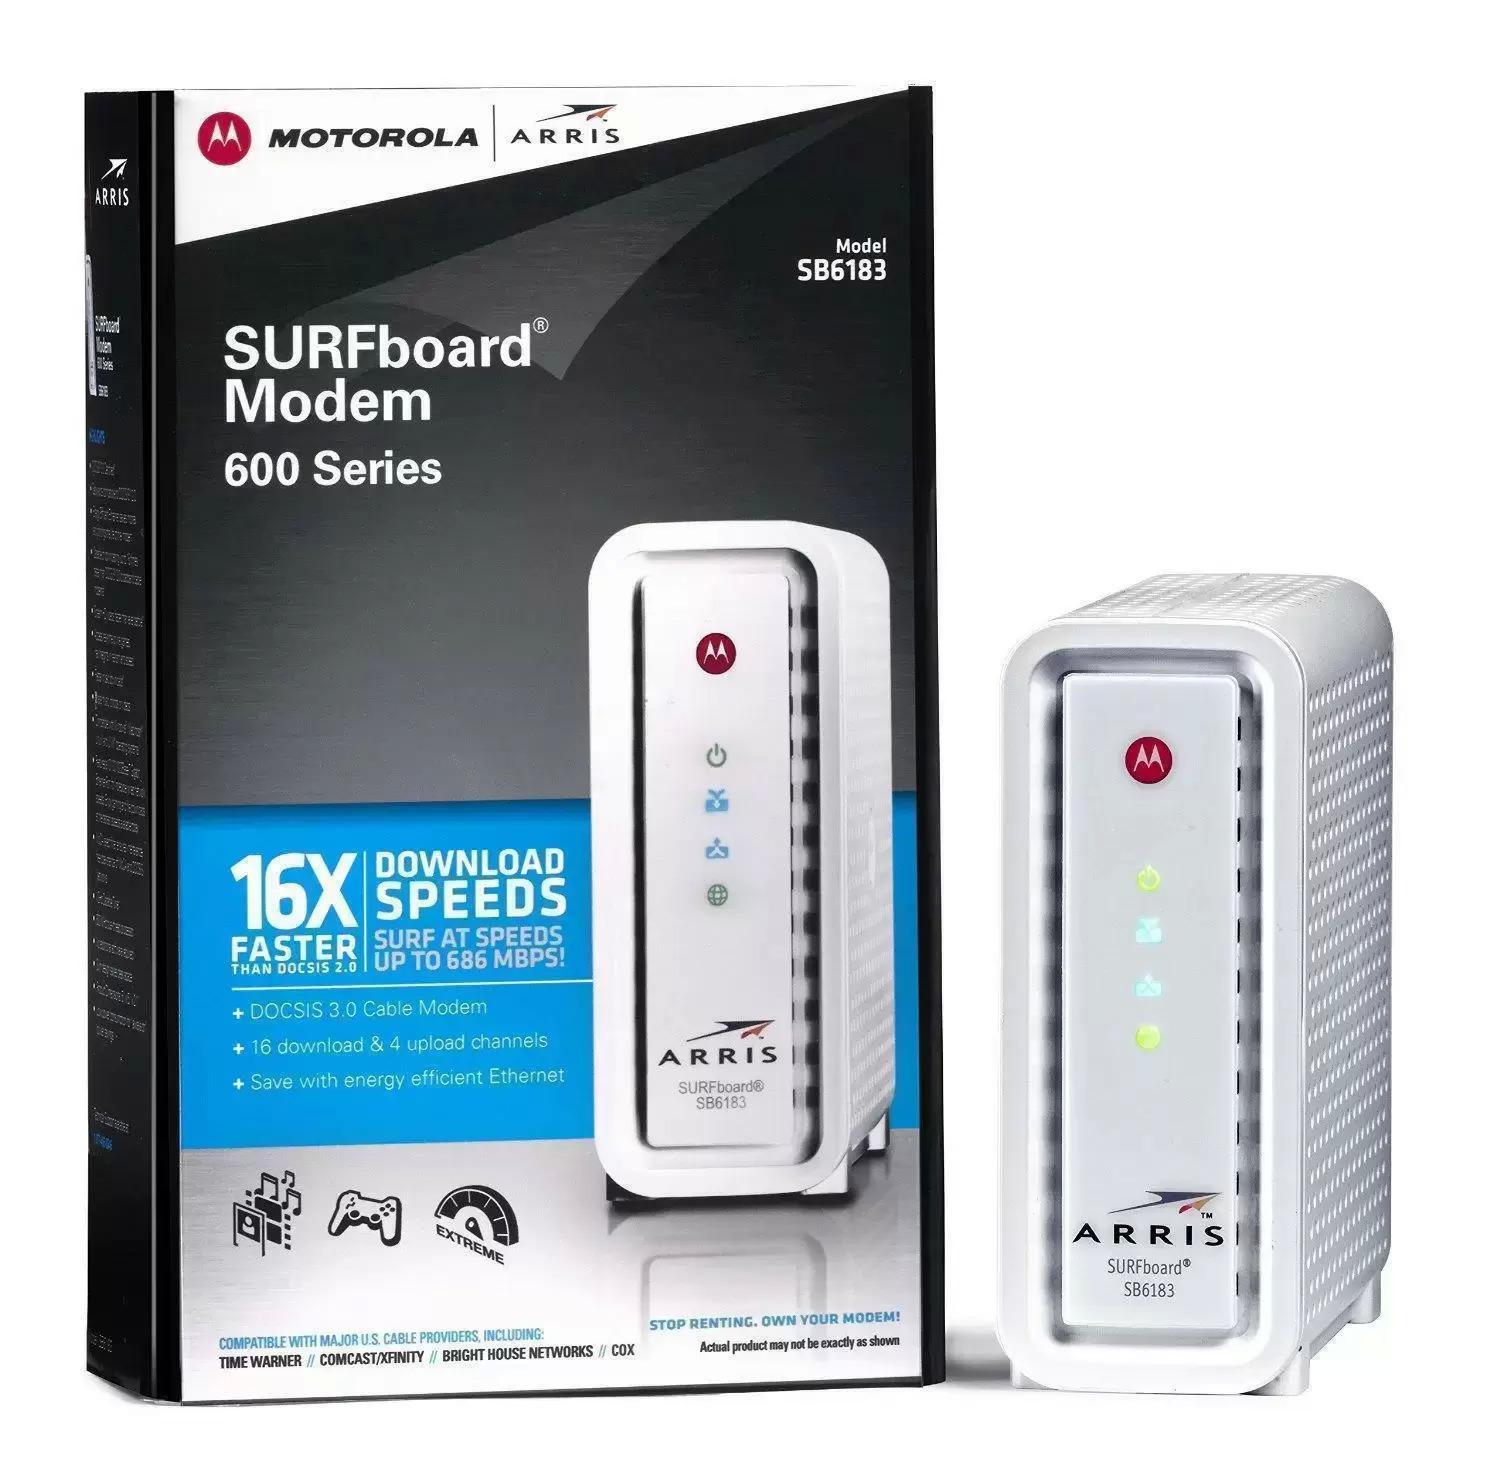 Motorola ARRIS SurfBoard SB6183 Cable Modem for $49 Shipped